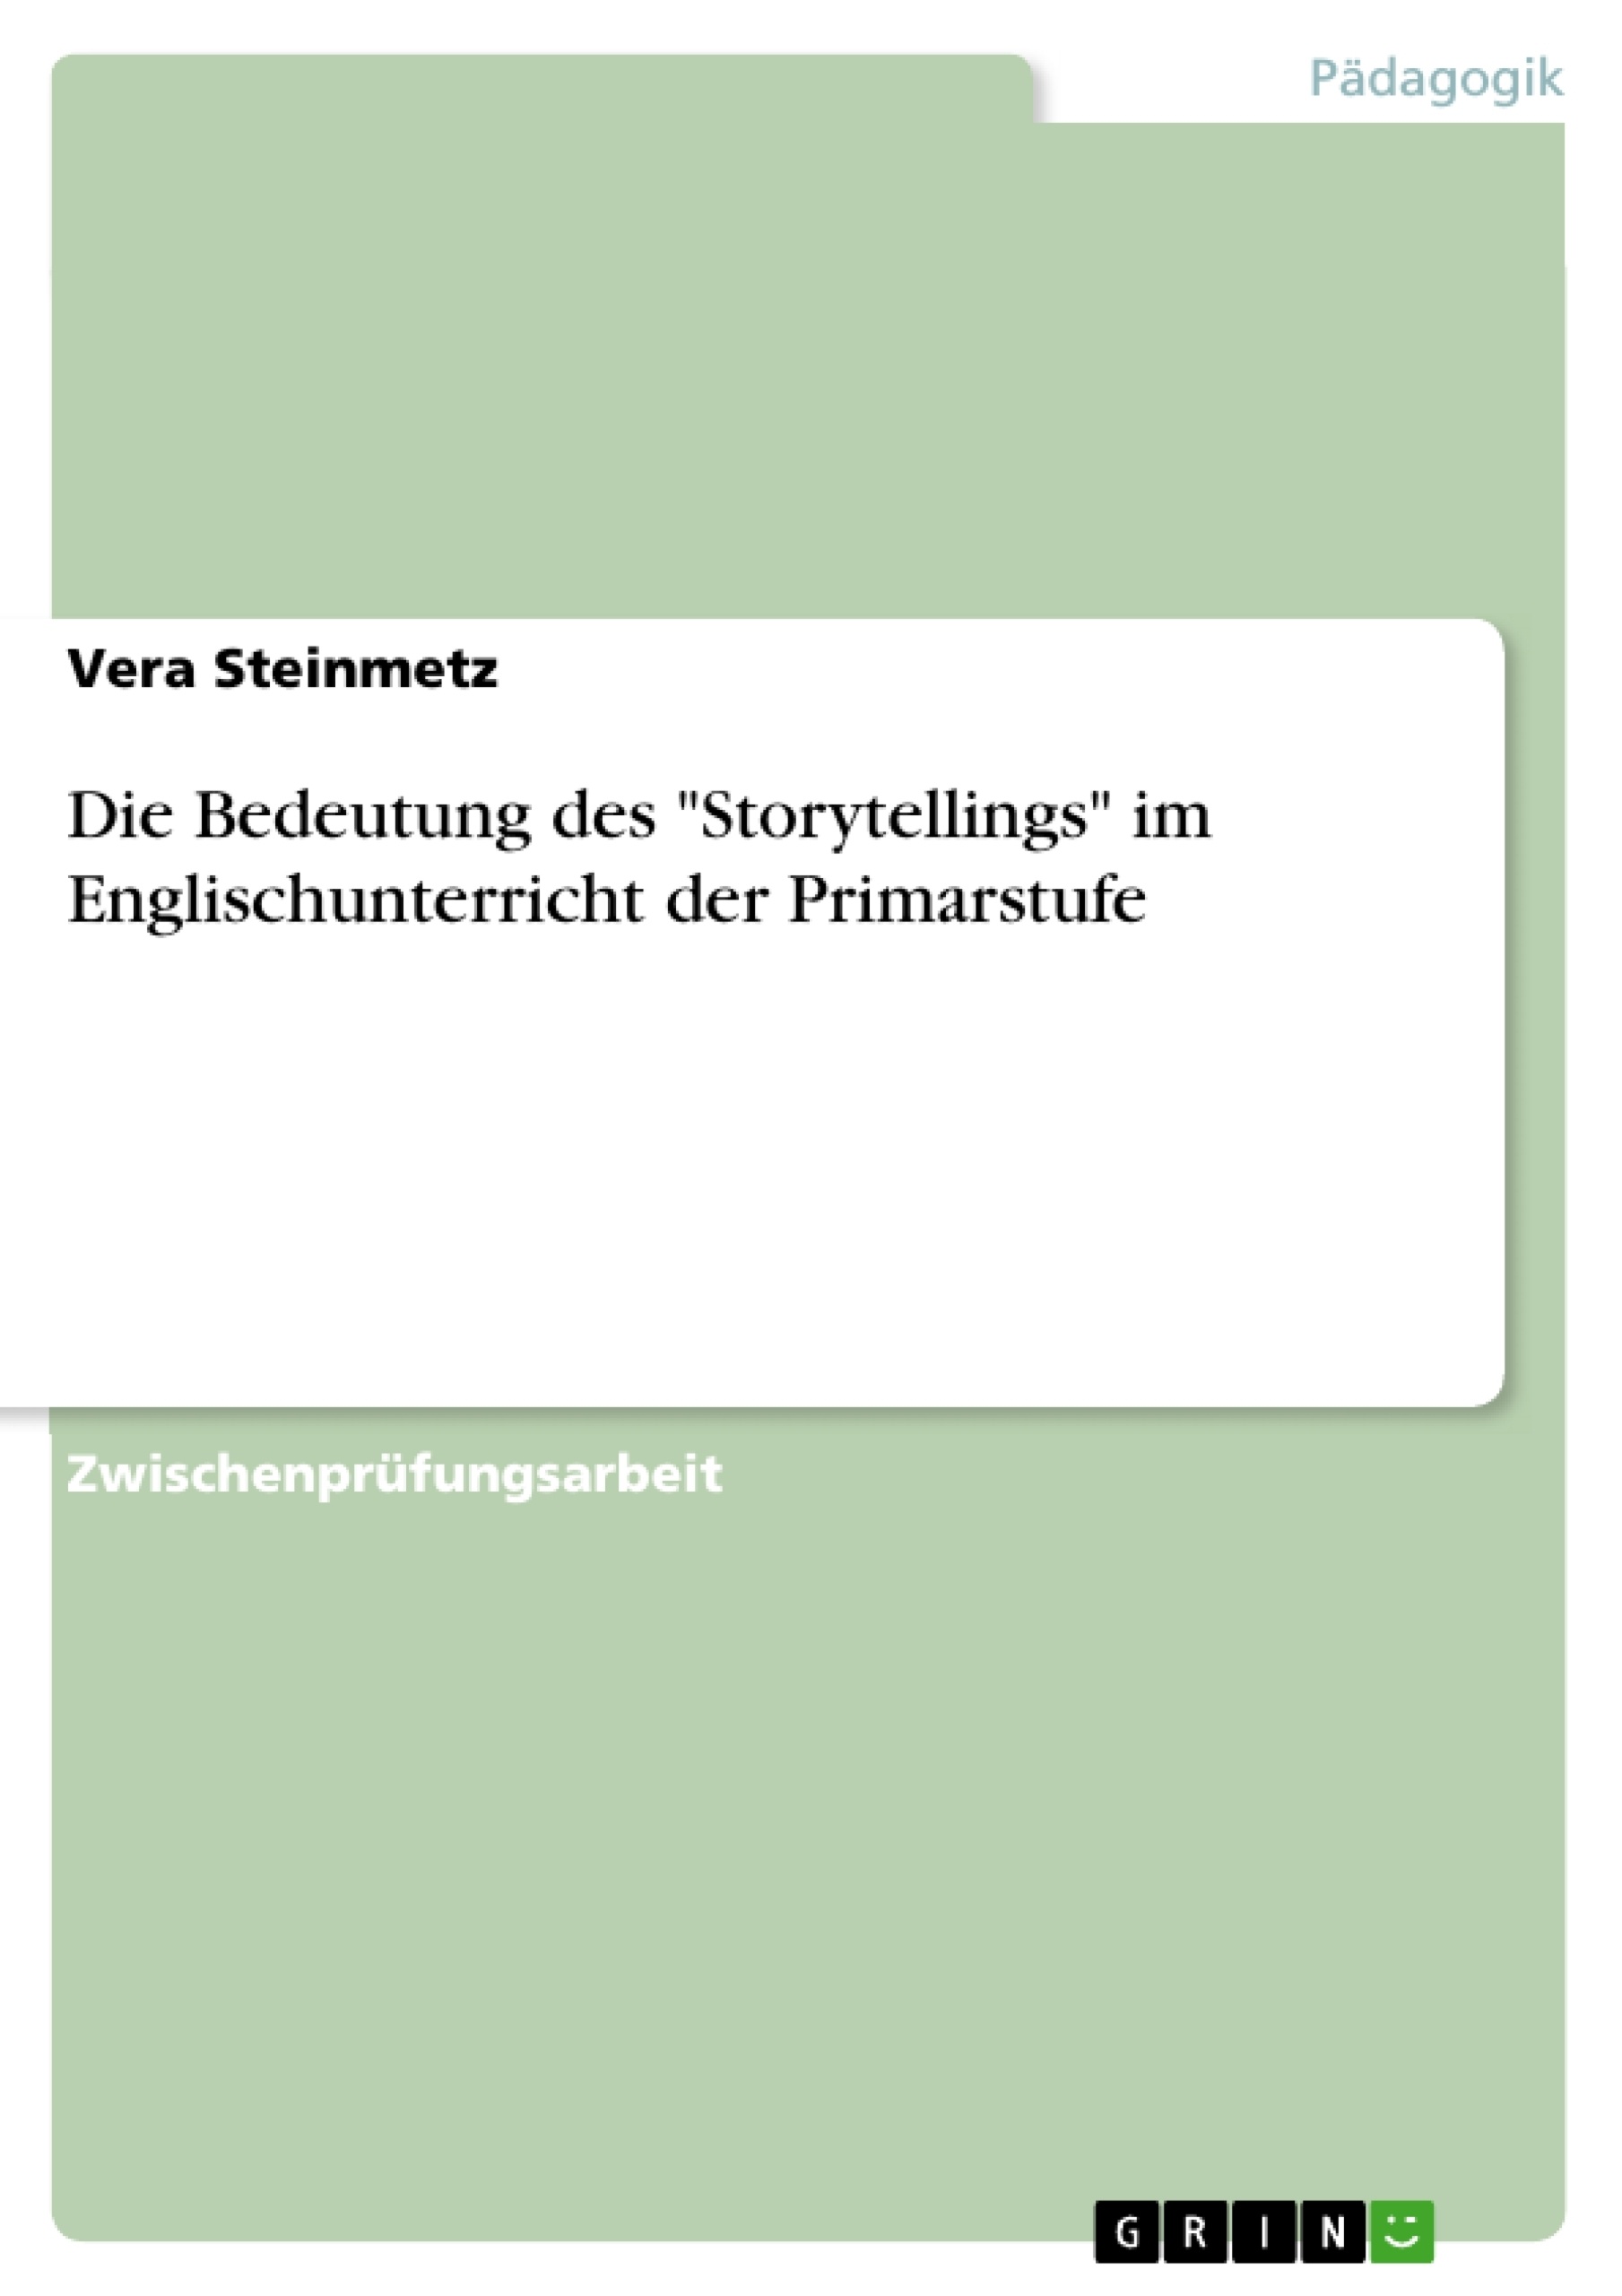 pdf The numerical record of university attendance in Germany